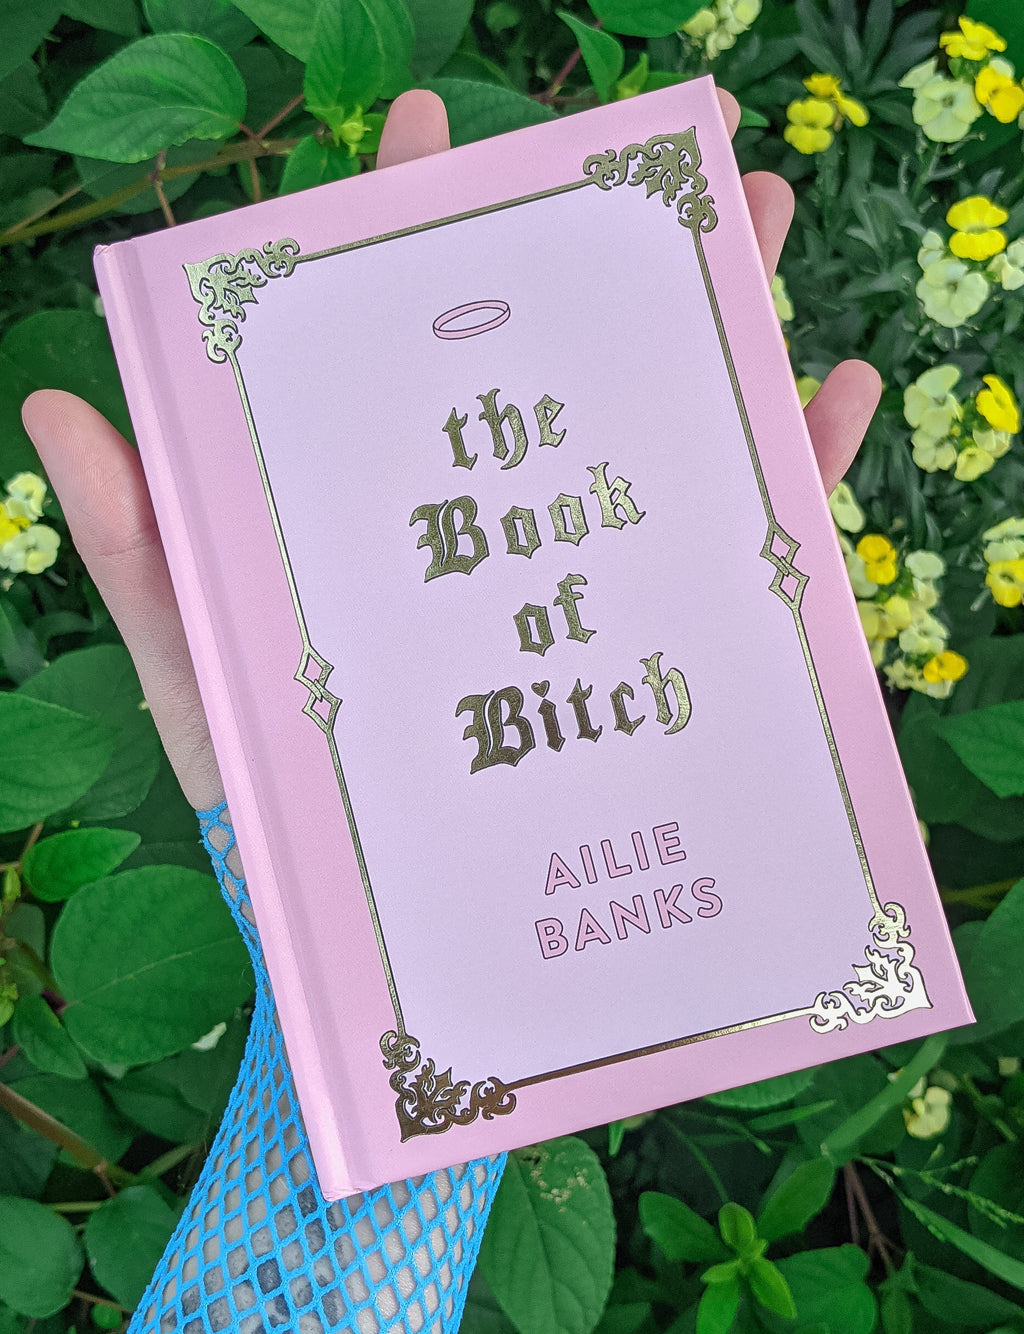 THE BOOK OF BITCH